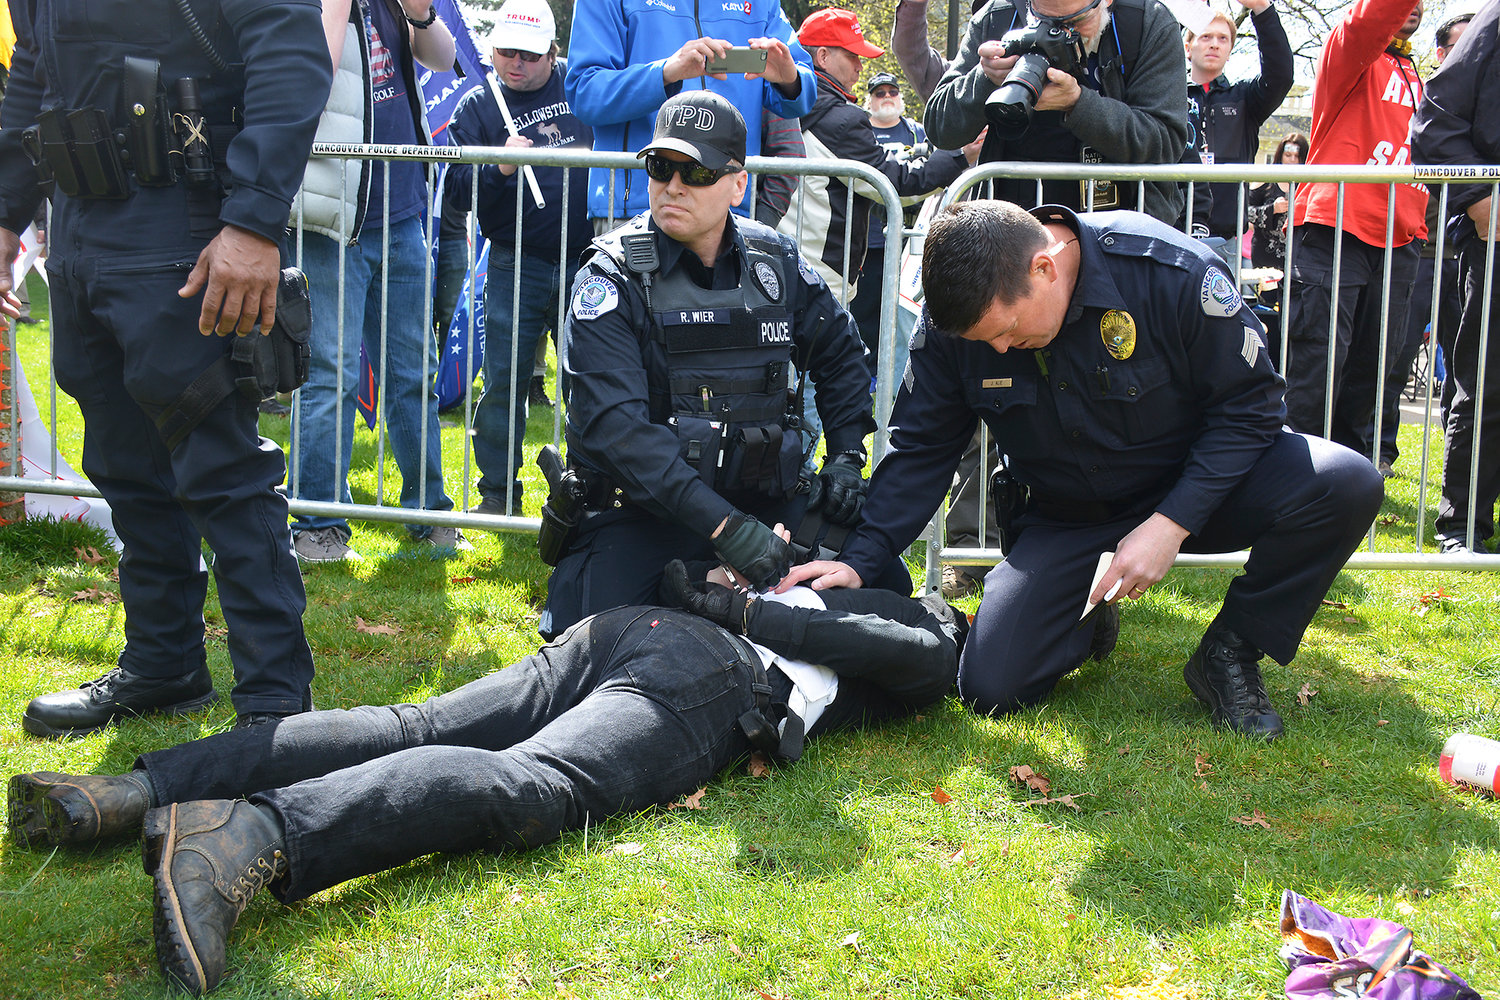 Anarchists are arrested Sunday during a pro-Trump rally in Vancouver after attempting to break through a small plastic fence separating them from the Trump supporters. 